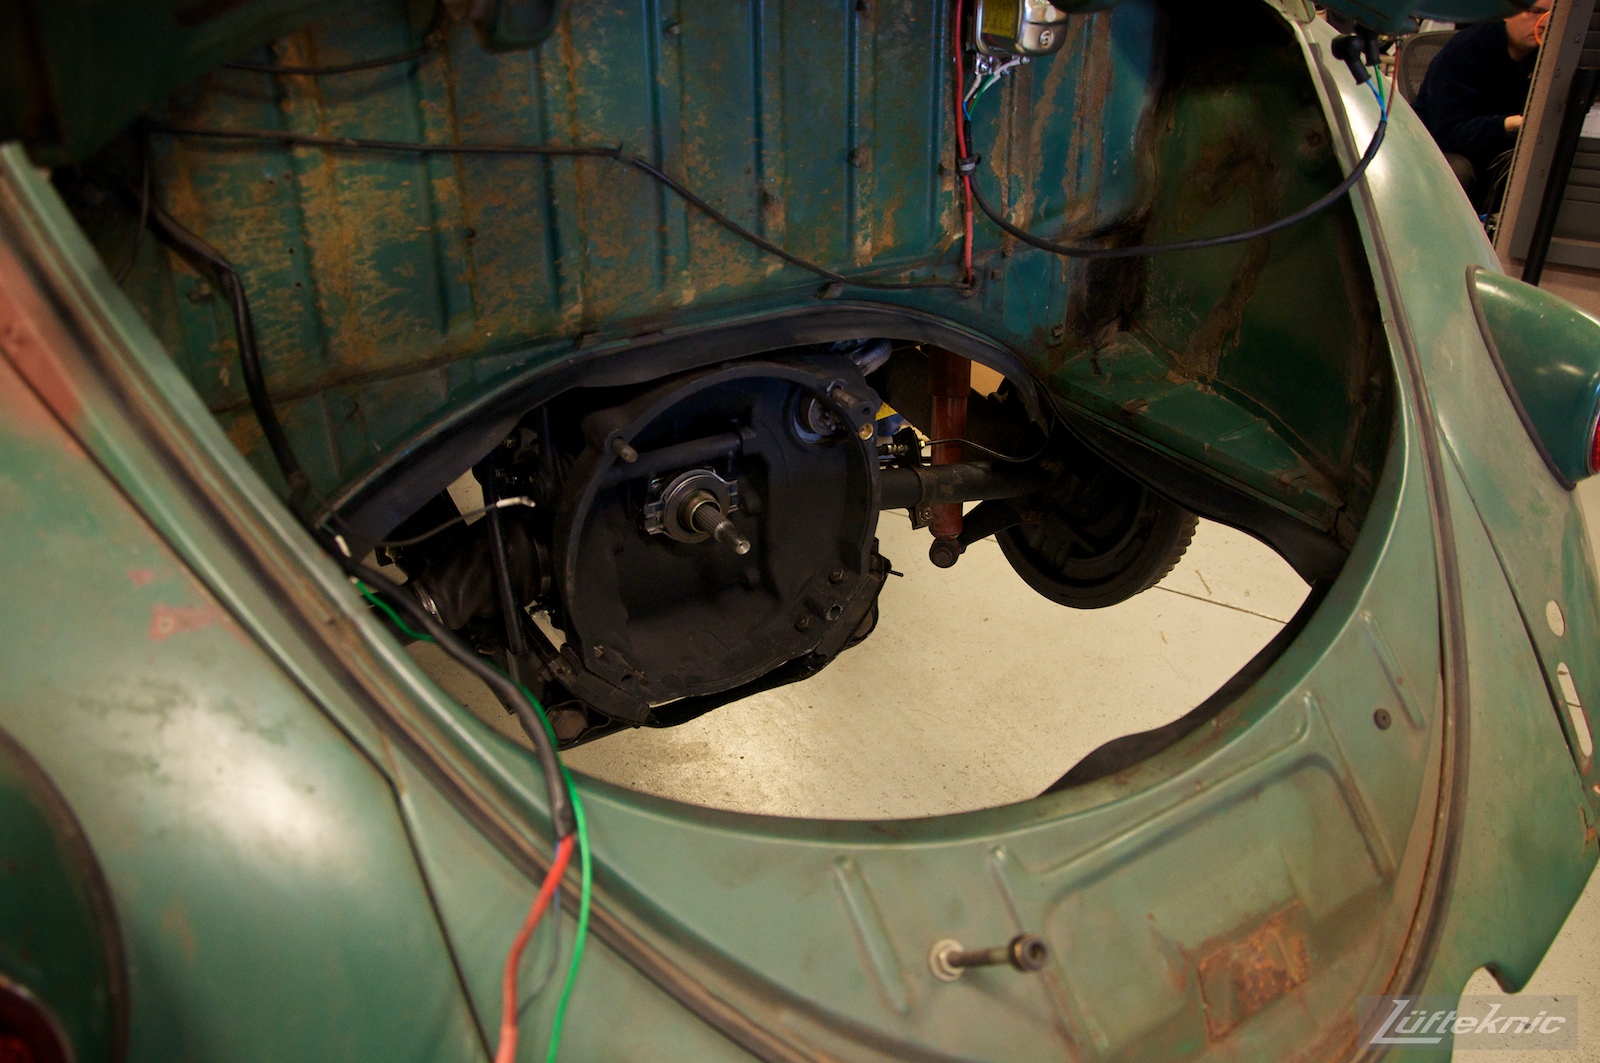 All original green 1960 Beetle with a Porsche 356 engine ready for install.